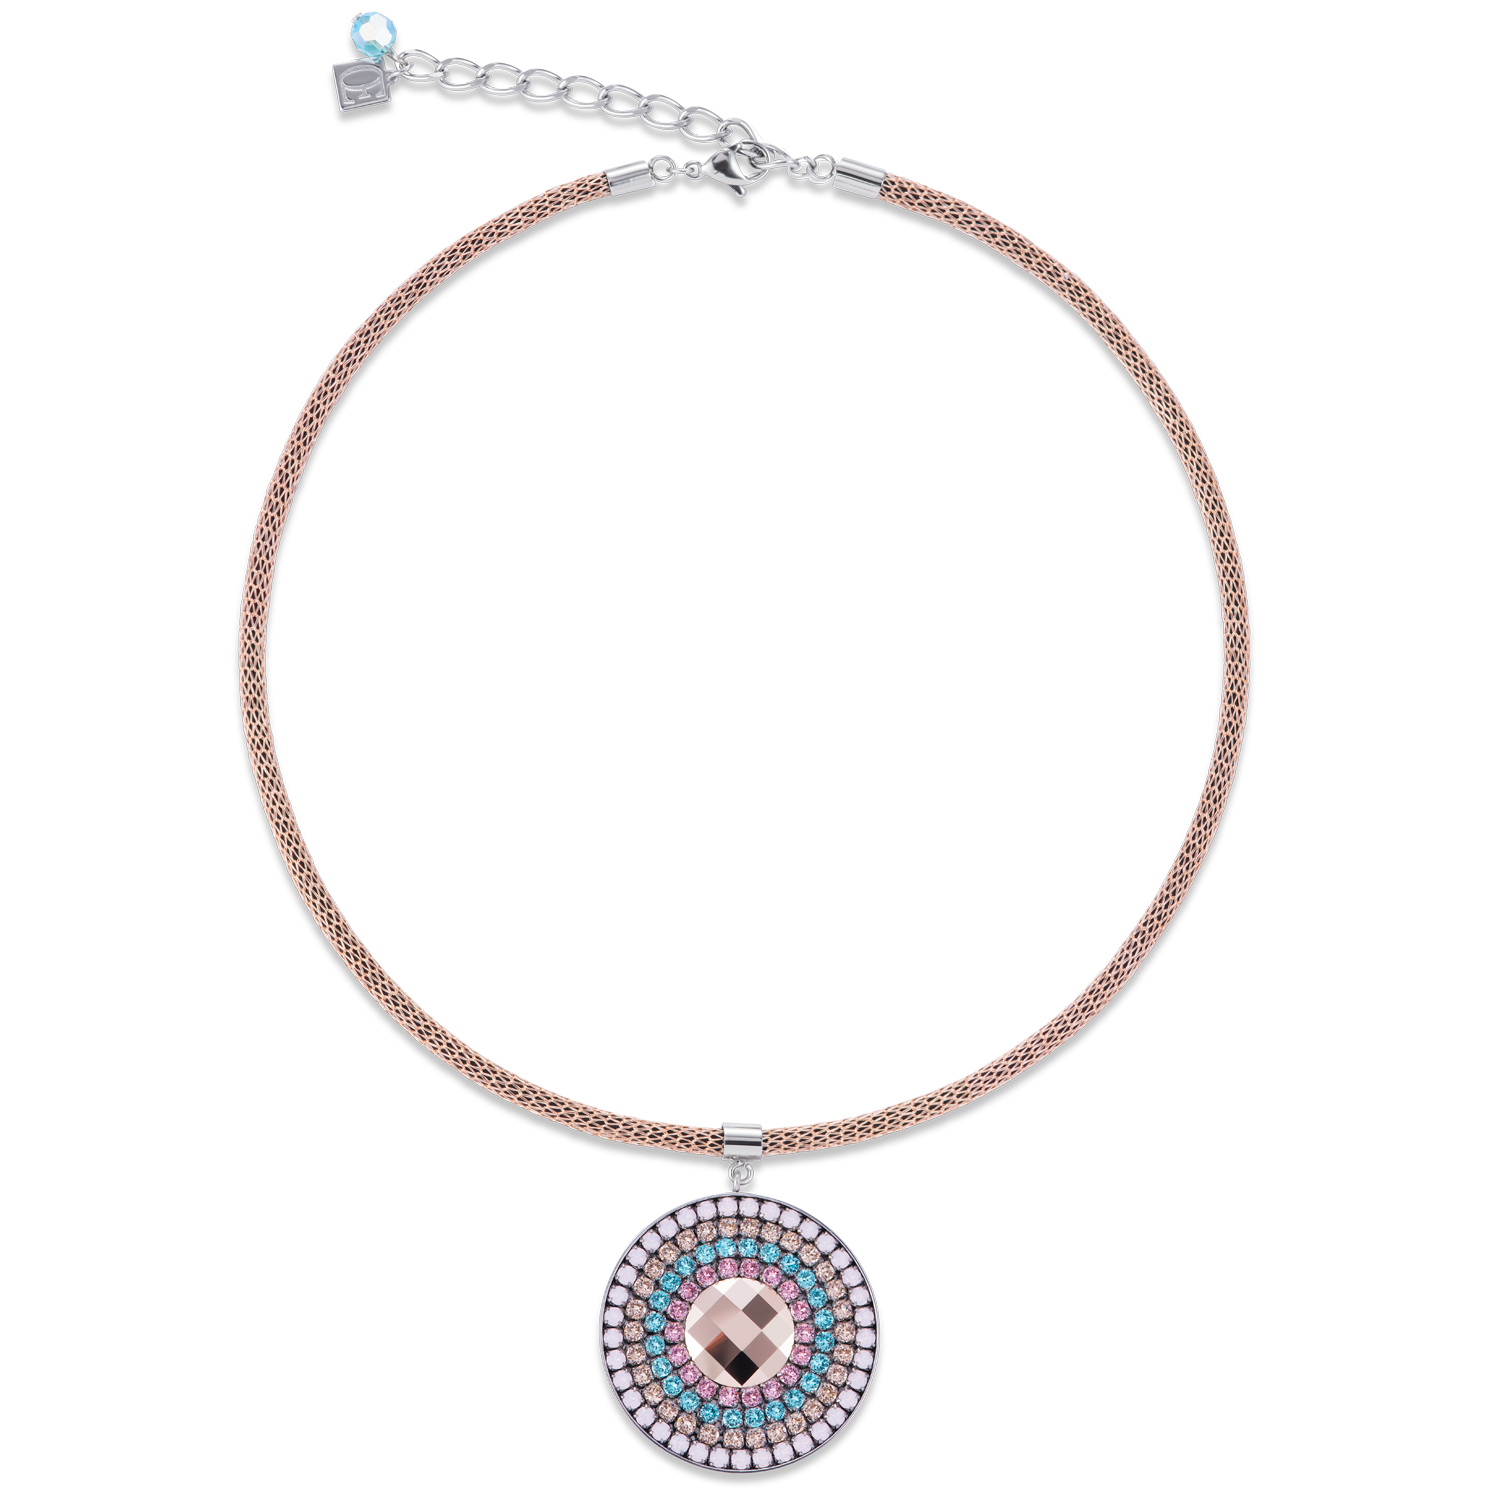 Necklace Amulet small Crystals & mesh rose-turquoise